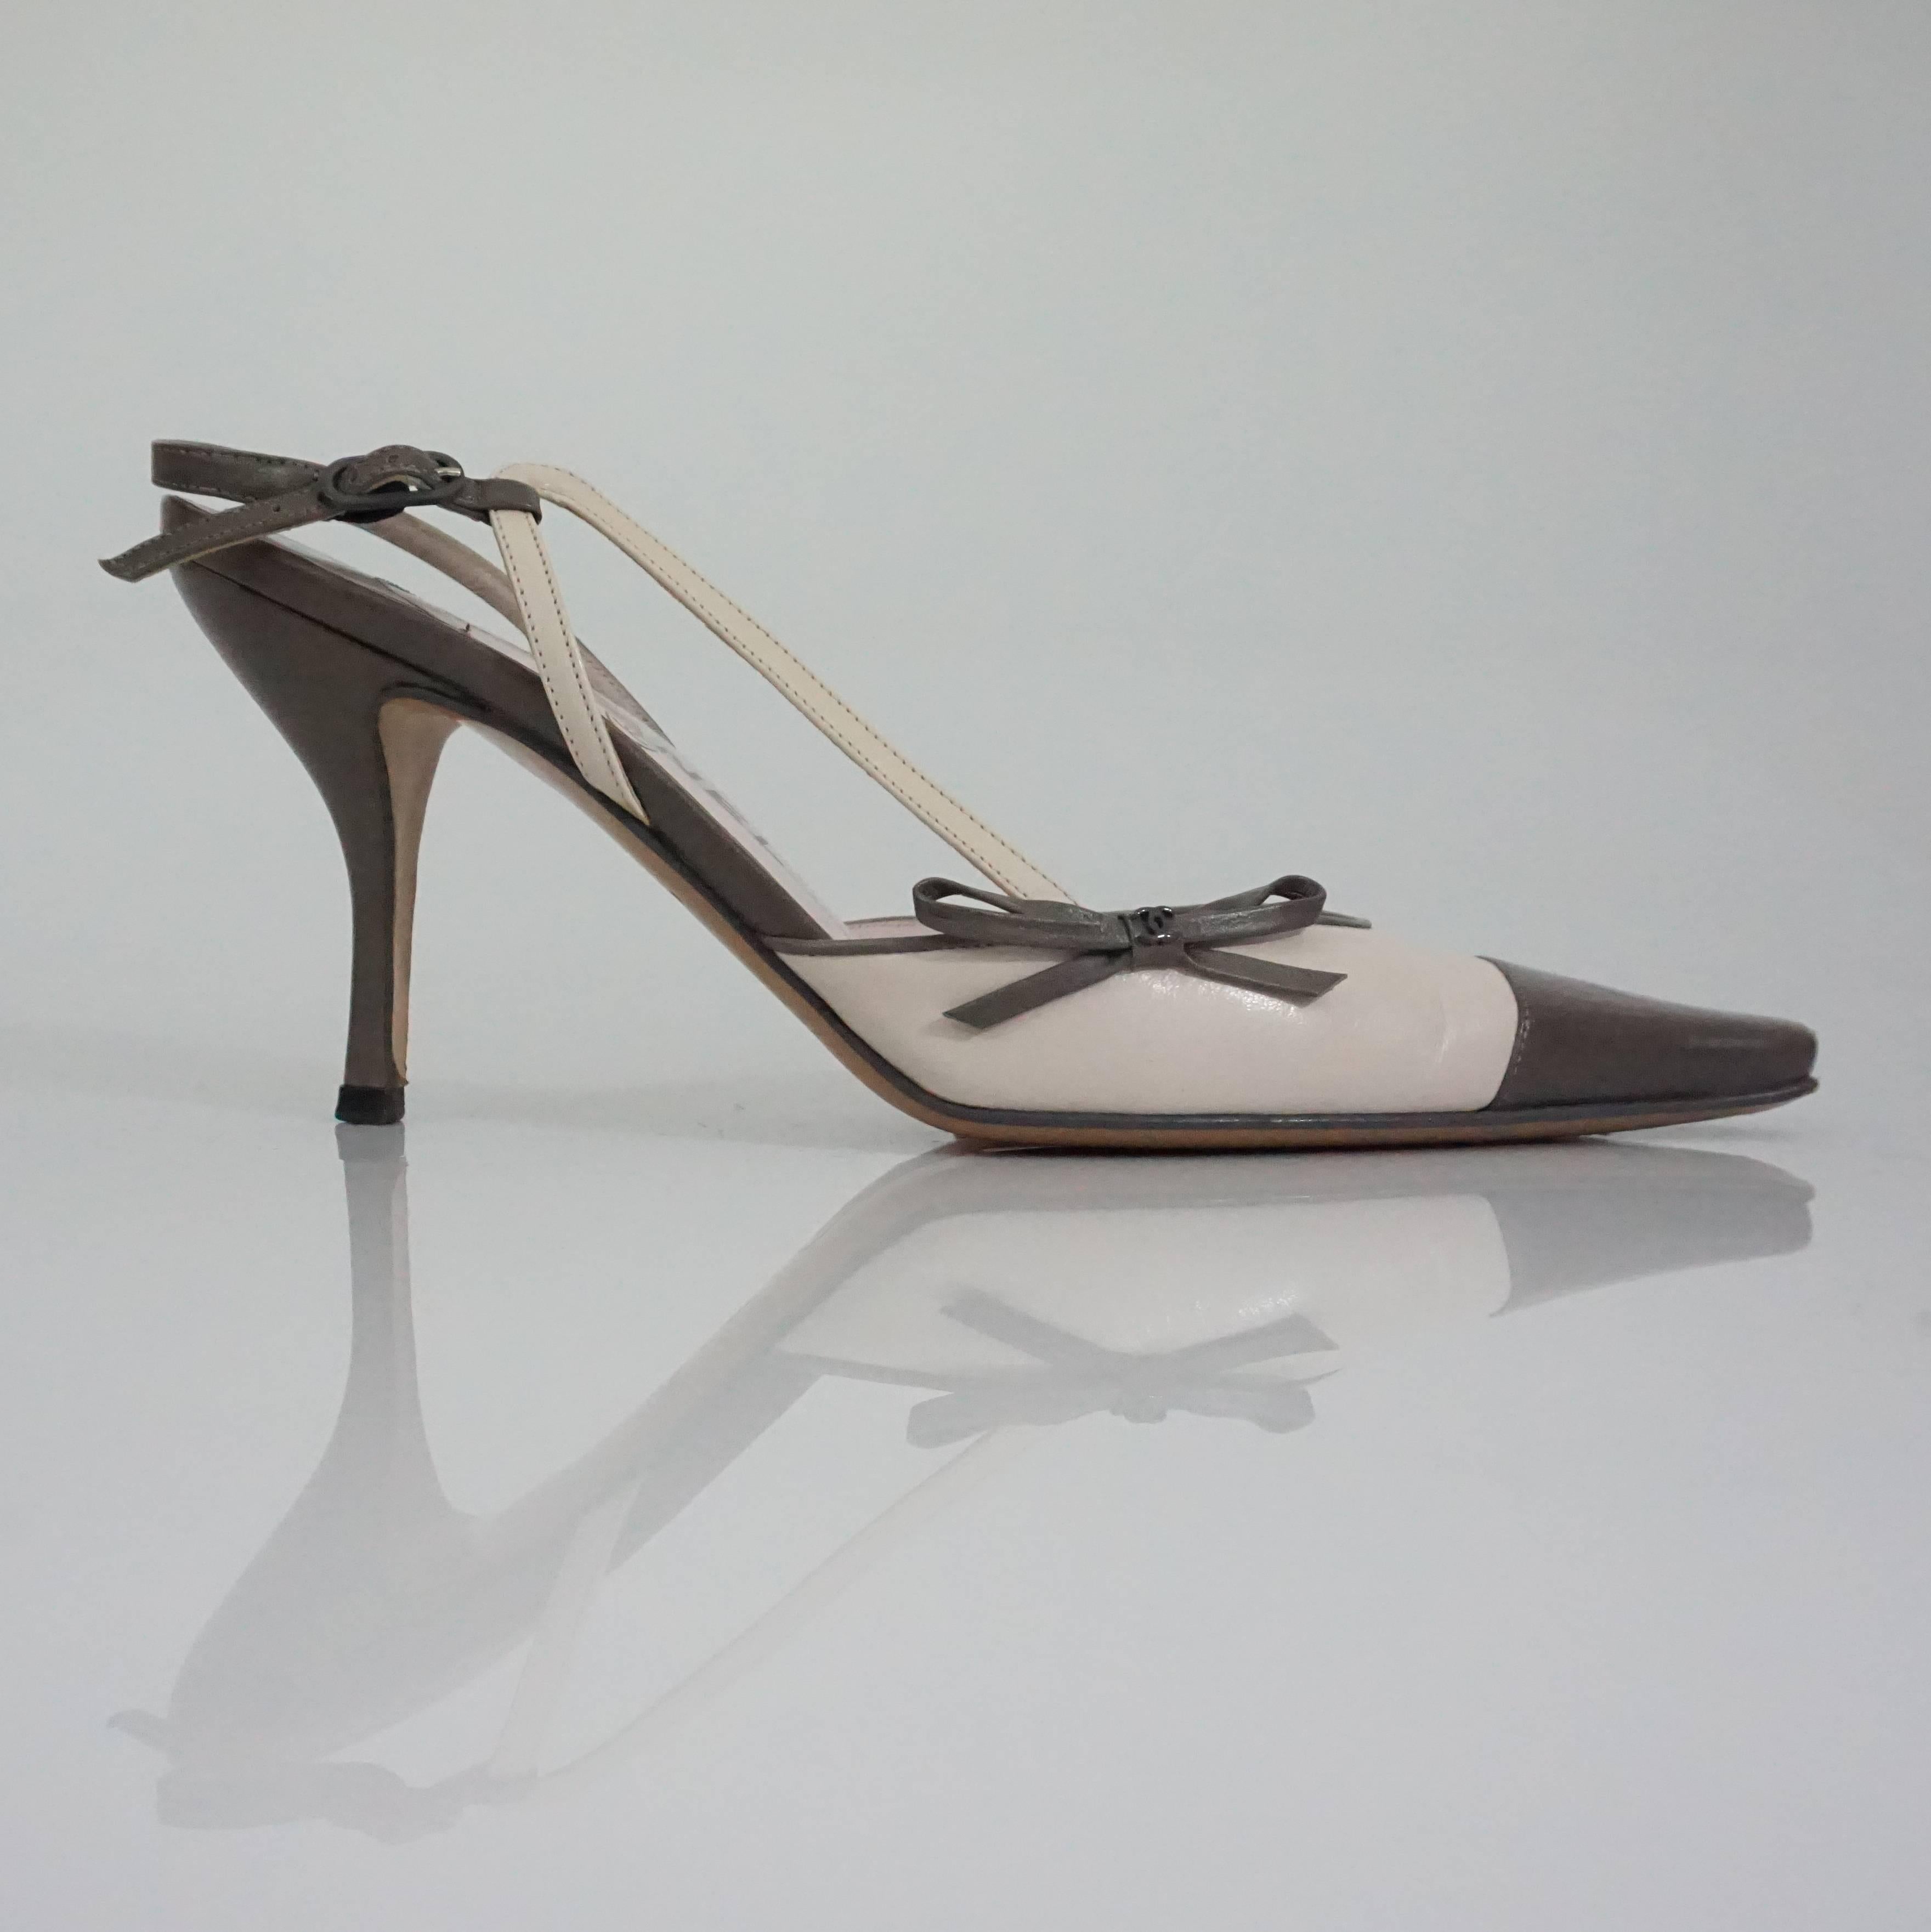 Chanel Creme and Taupe Slingback Heels - 37.5 These slingbacks have a side bow with an extra decorative strap coming up one side of the shoes. The shoe is in good condition, with minor wear. 
Measurments:
Heel height: 3.75